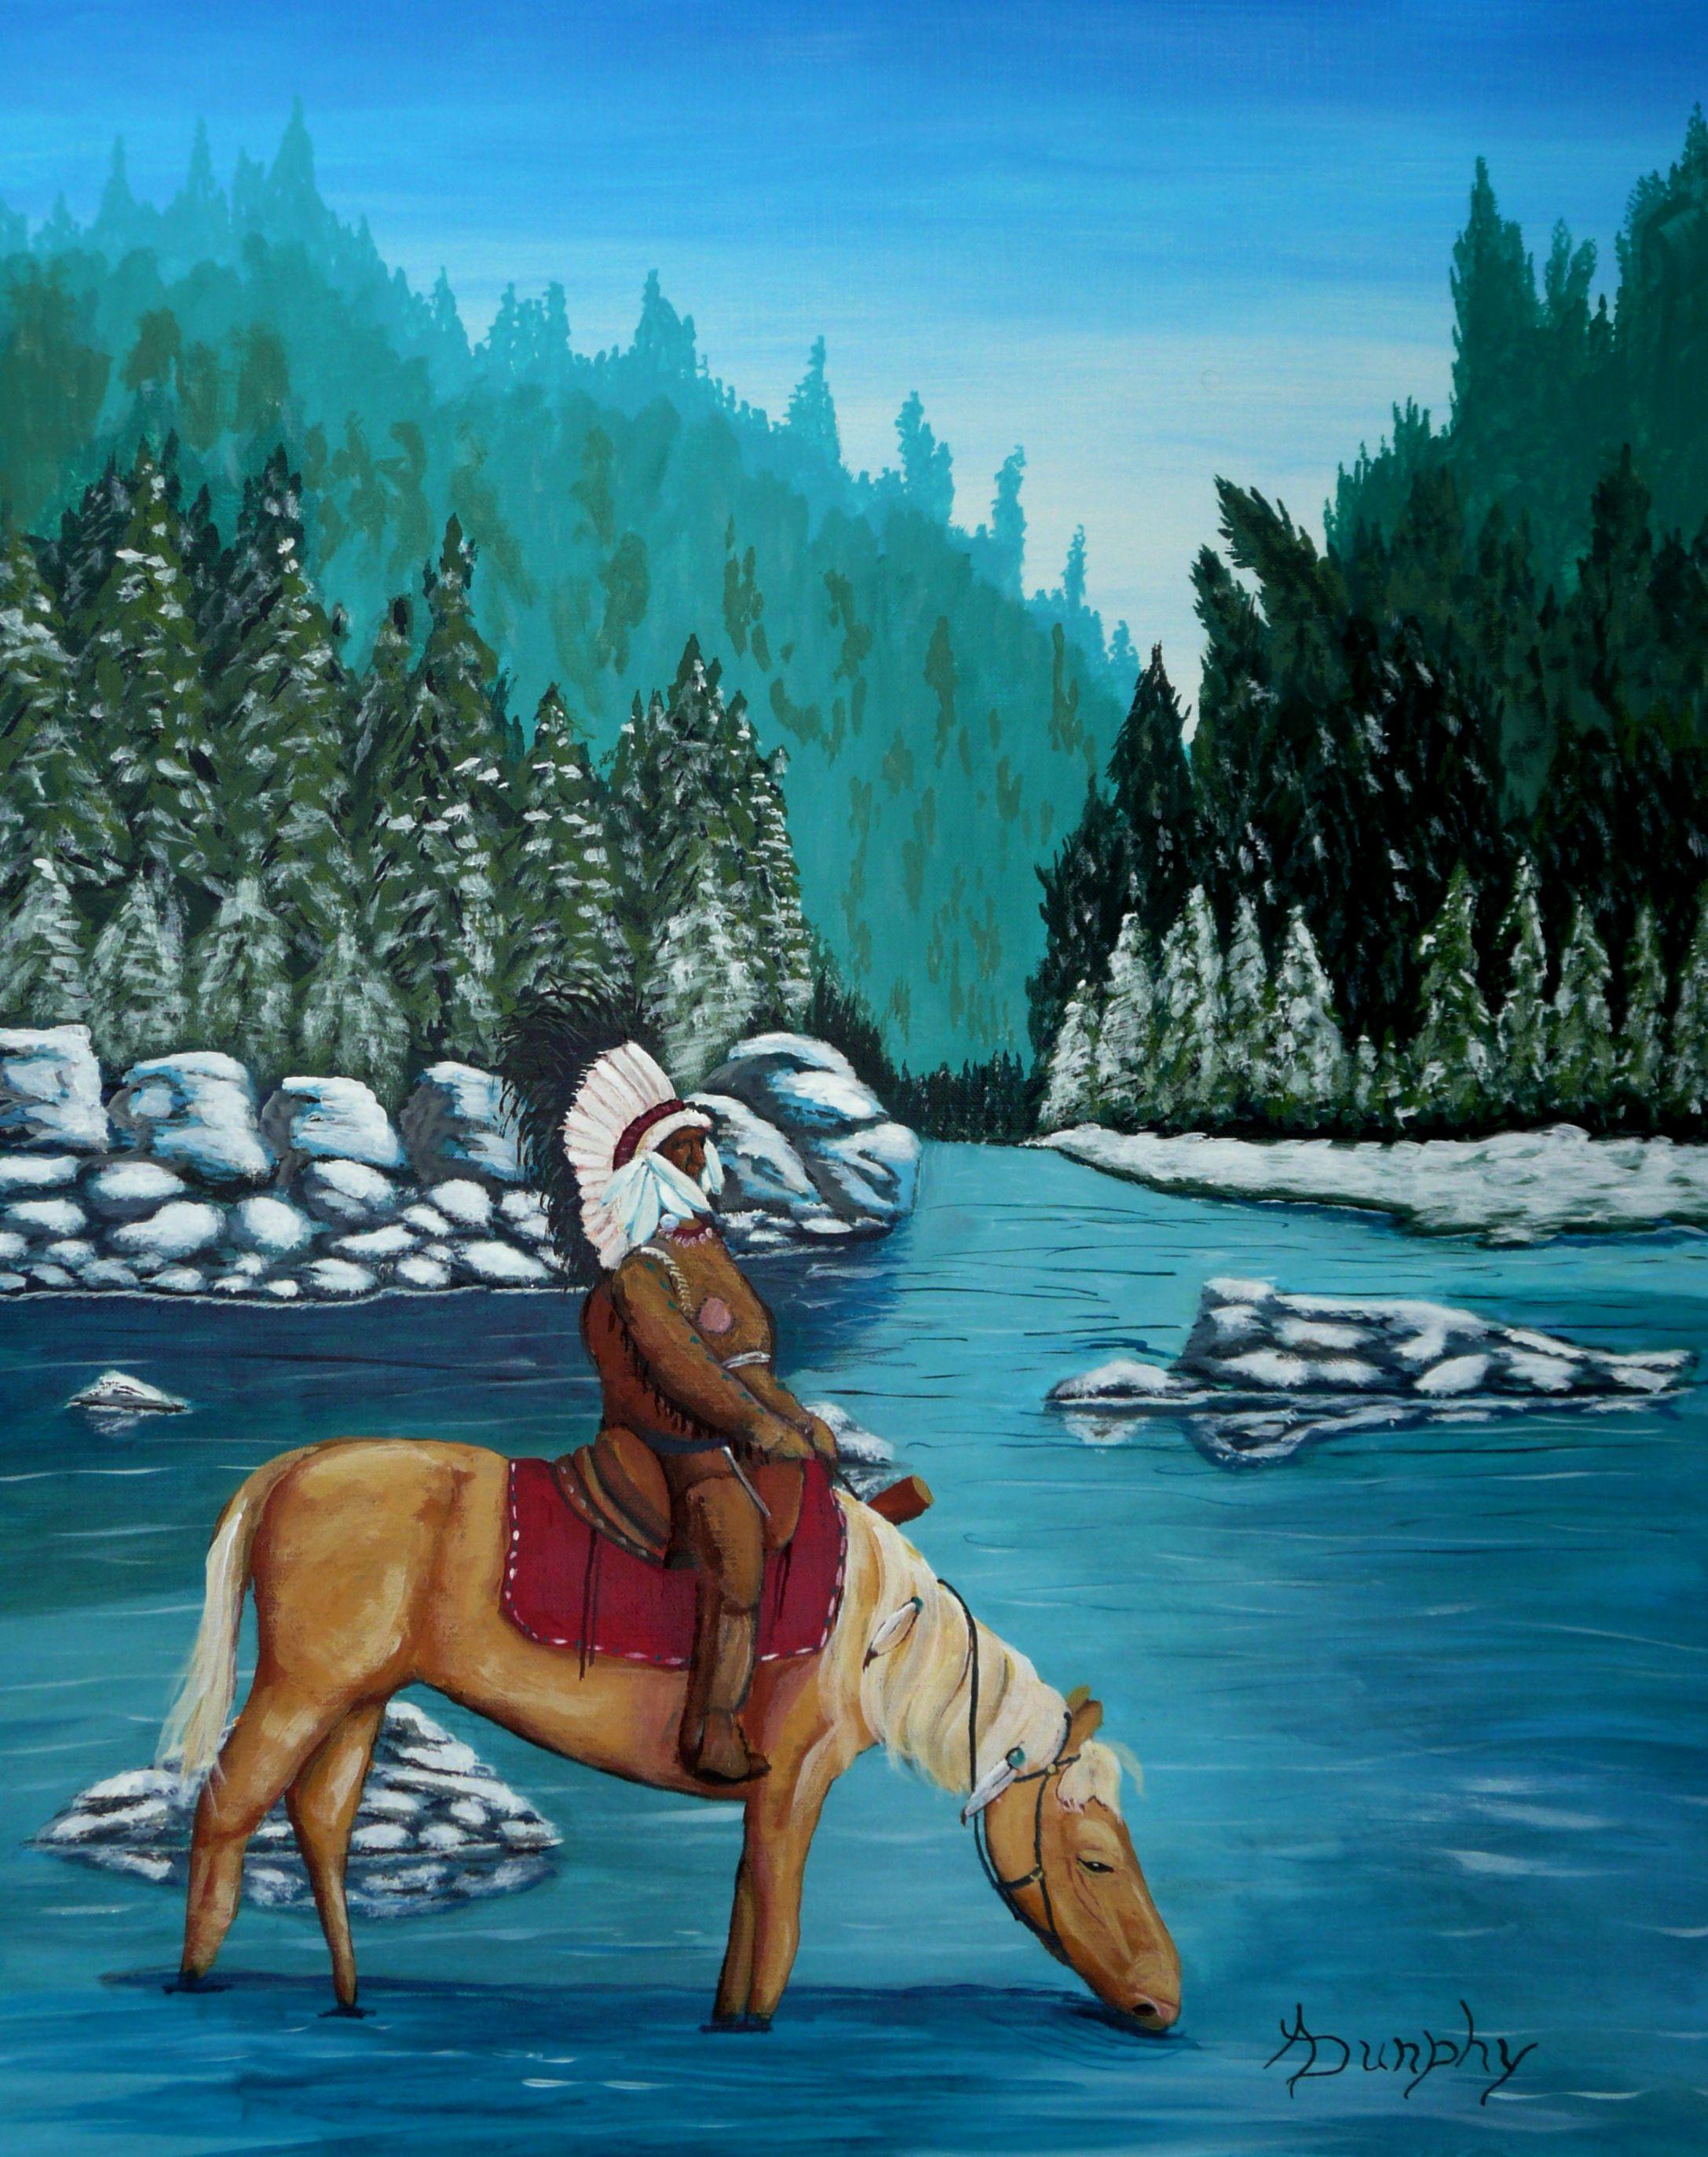 On a cold winter morning a native American pauses beside a stream to give his horse, a Golden Palomino, a drink. The trees are heavy with snow and all around is silent. This serene scene has been created using only professional grade acrylics on a